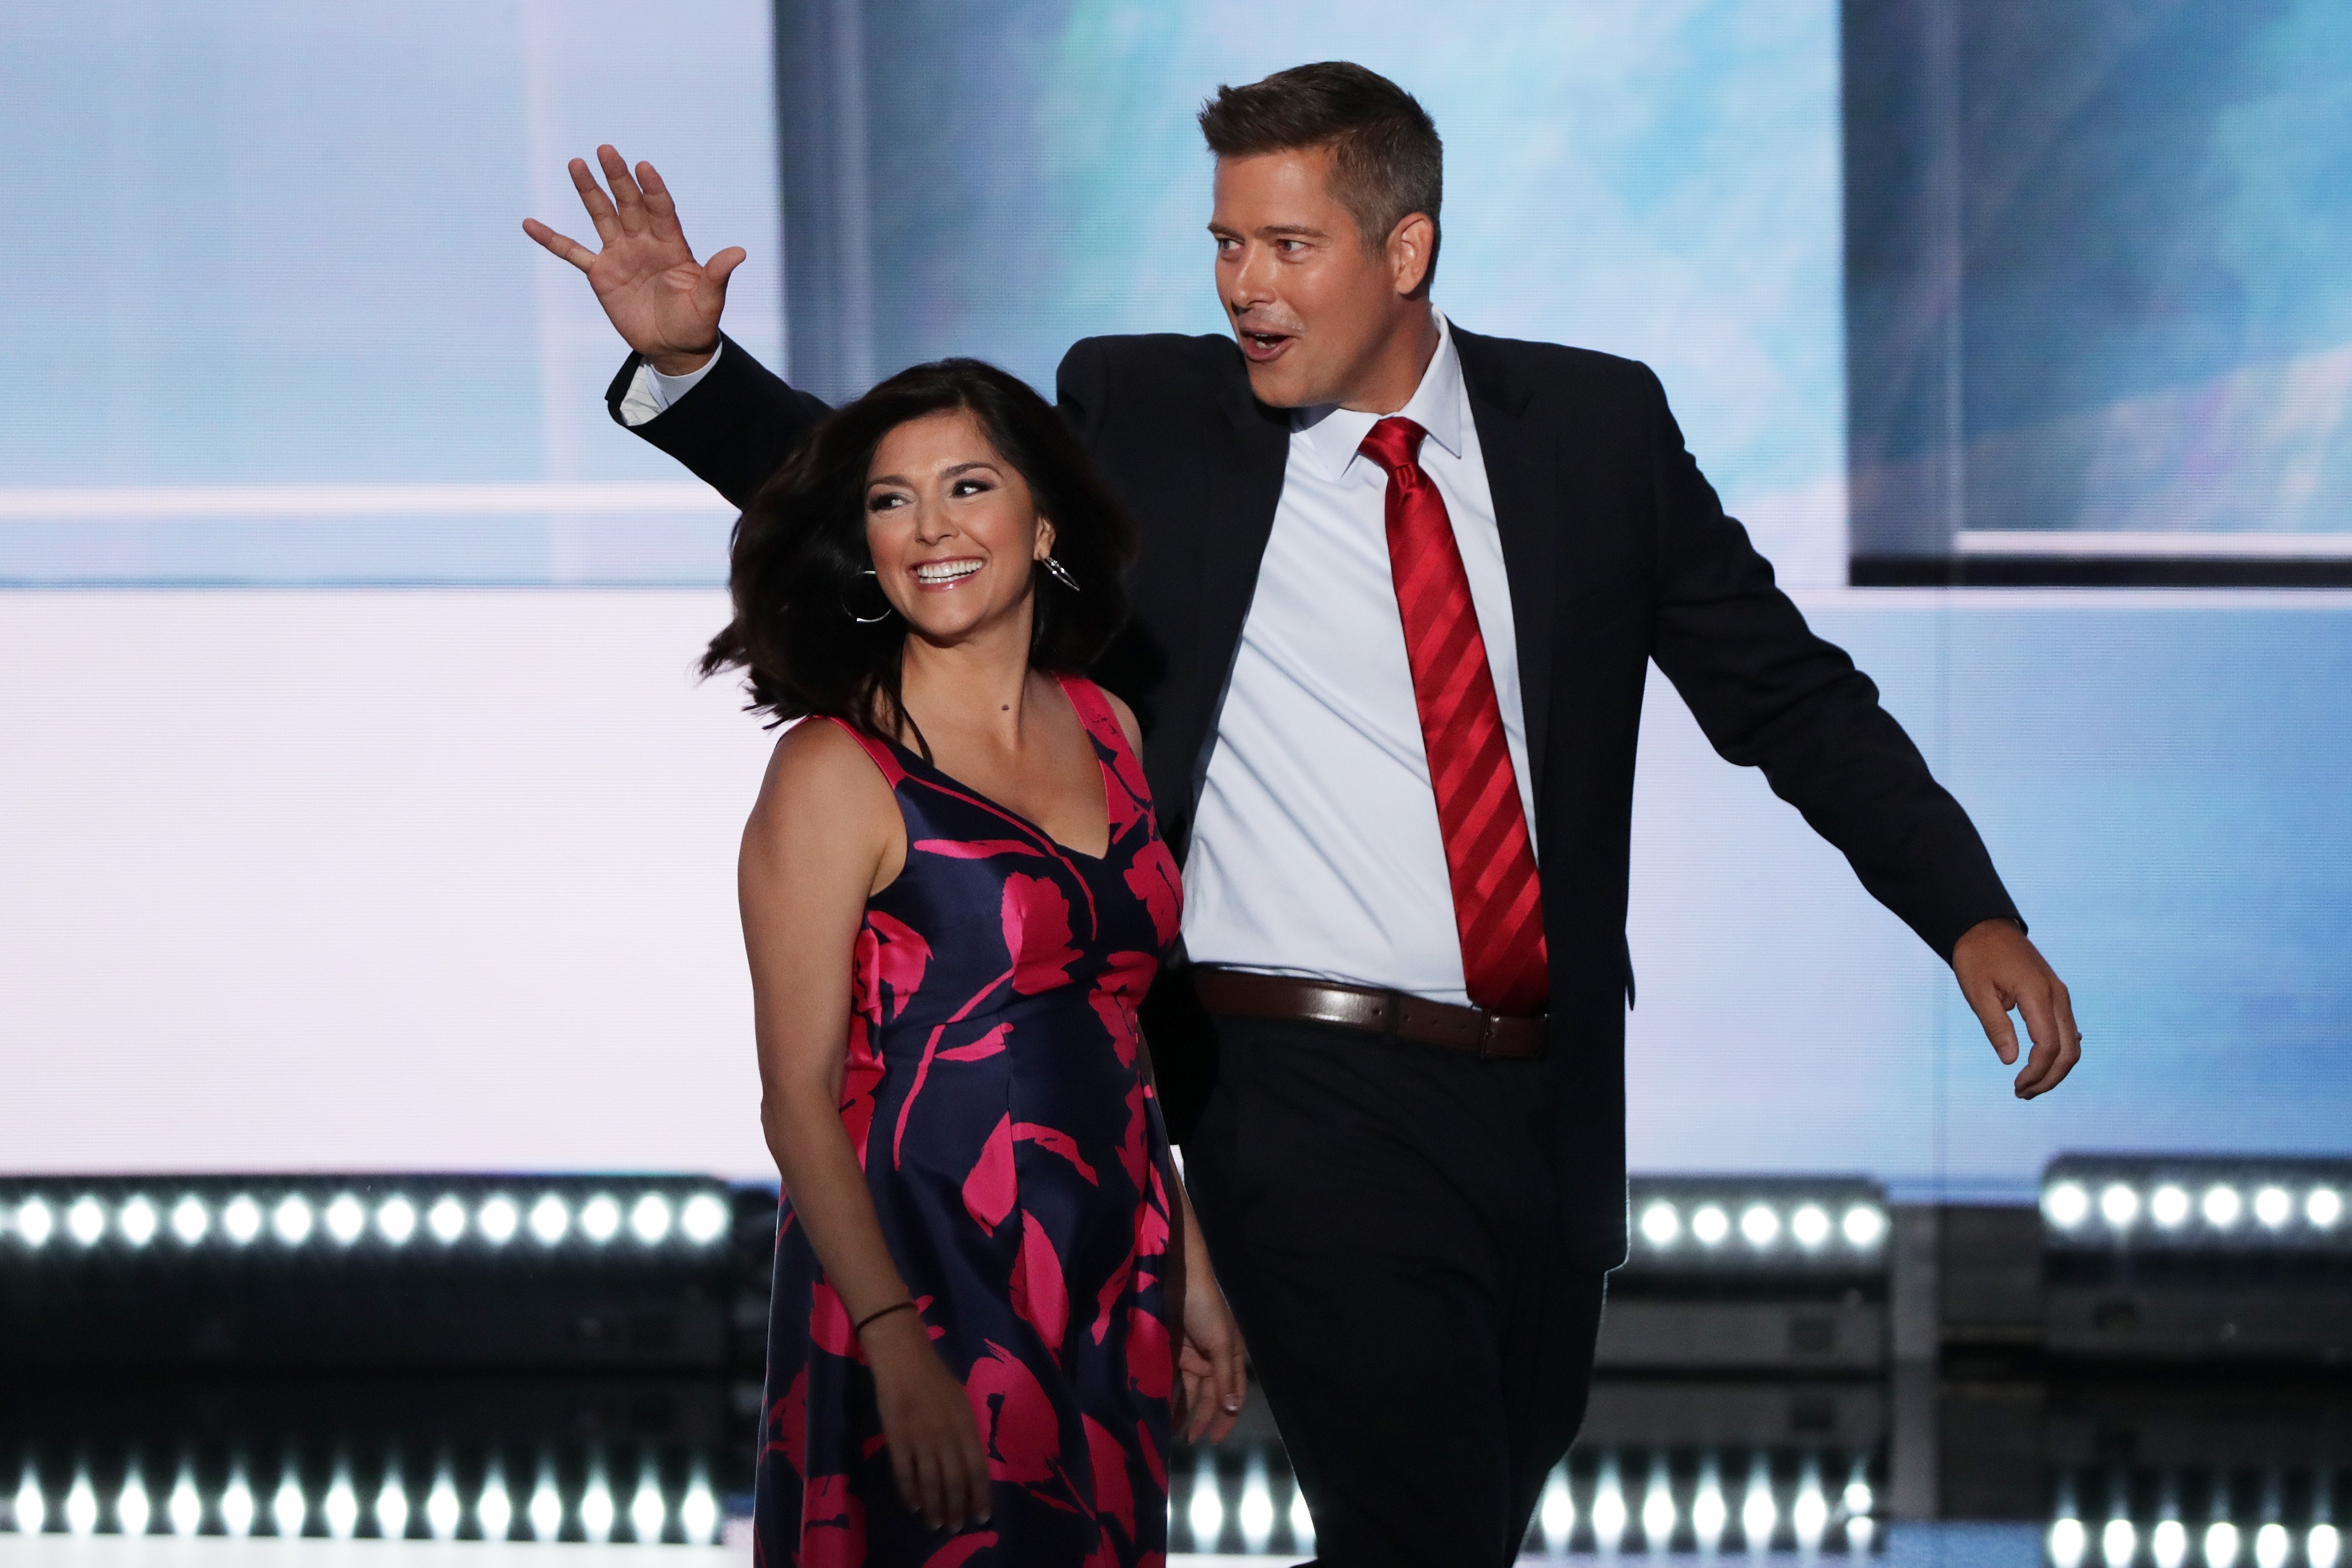  U.S. Rep. Sean Duffy along with his wife Rachel Campos-Duffy walk on stage on July 18, 2016 |Photo: Getty Images